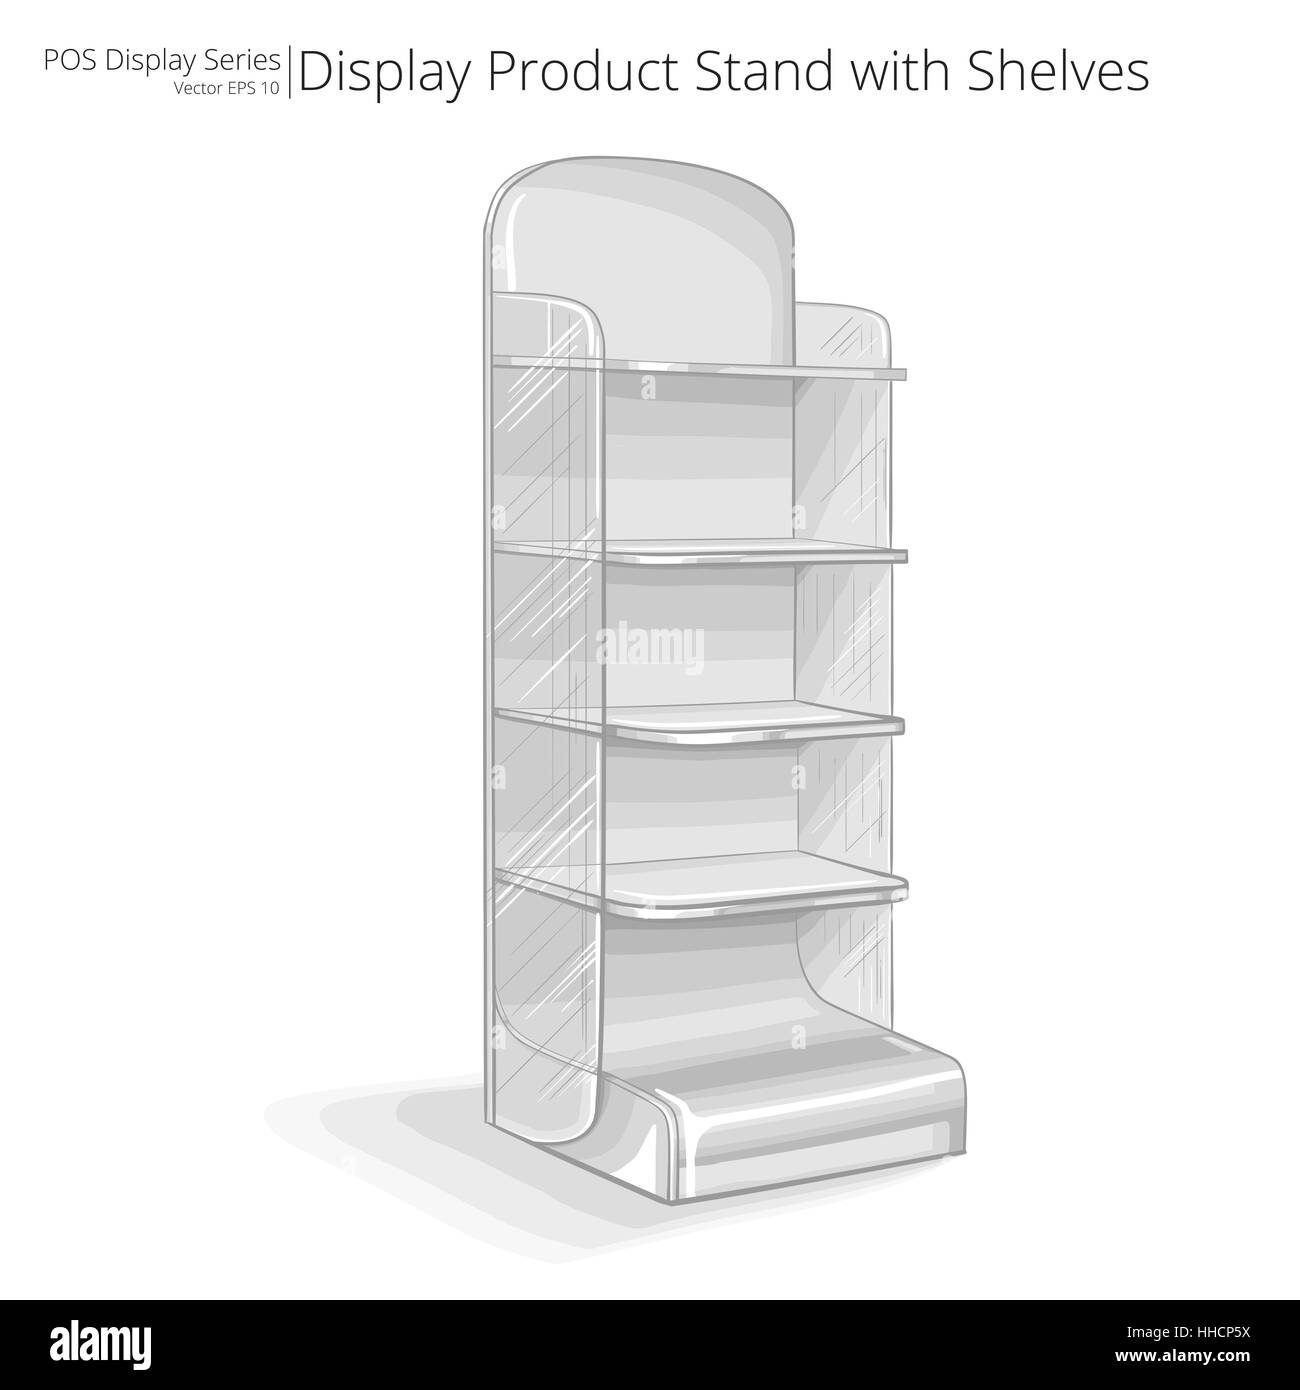 Vector, Illustration of a Product Stand with shelves. Sketch style. POS series. Stock Photo